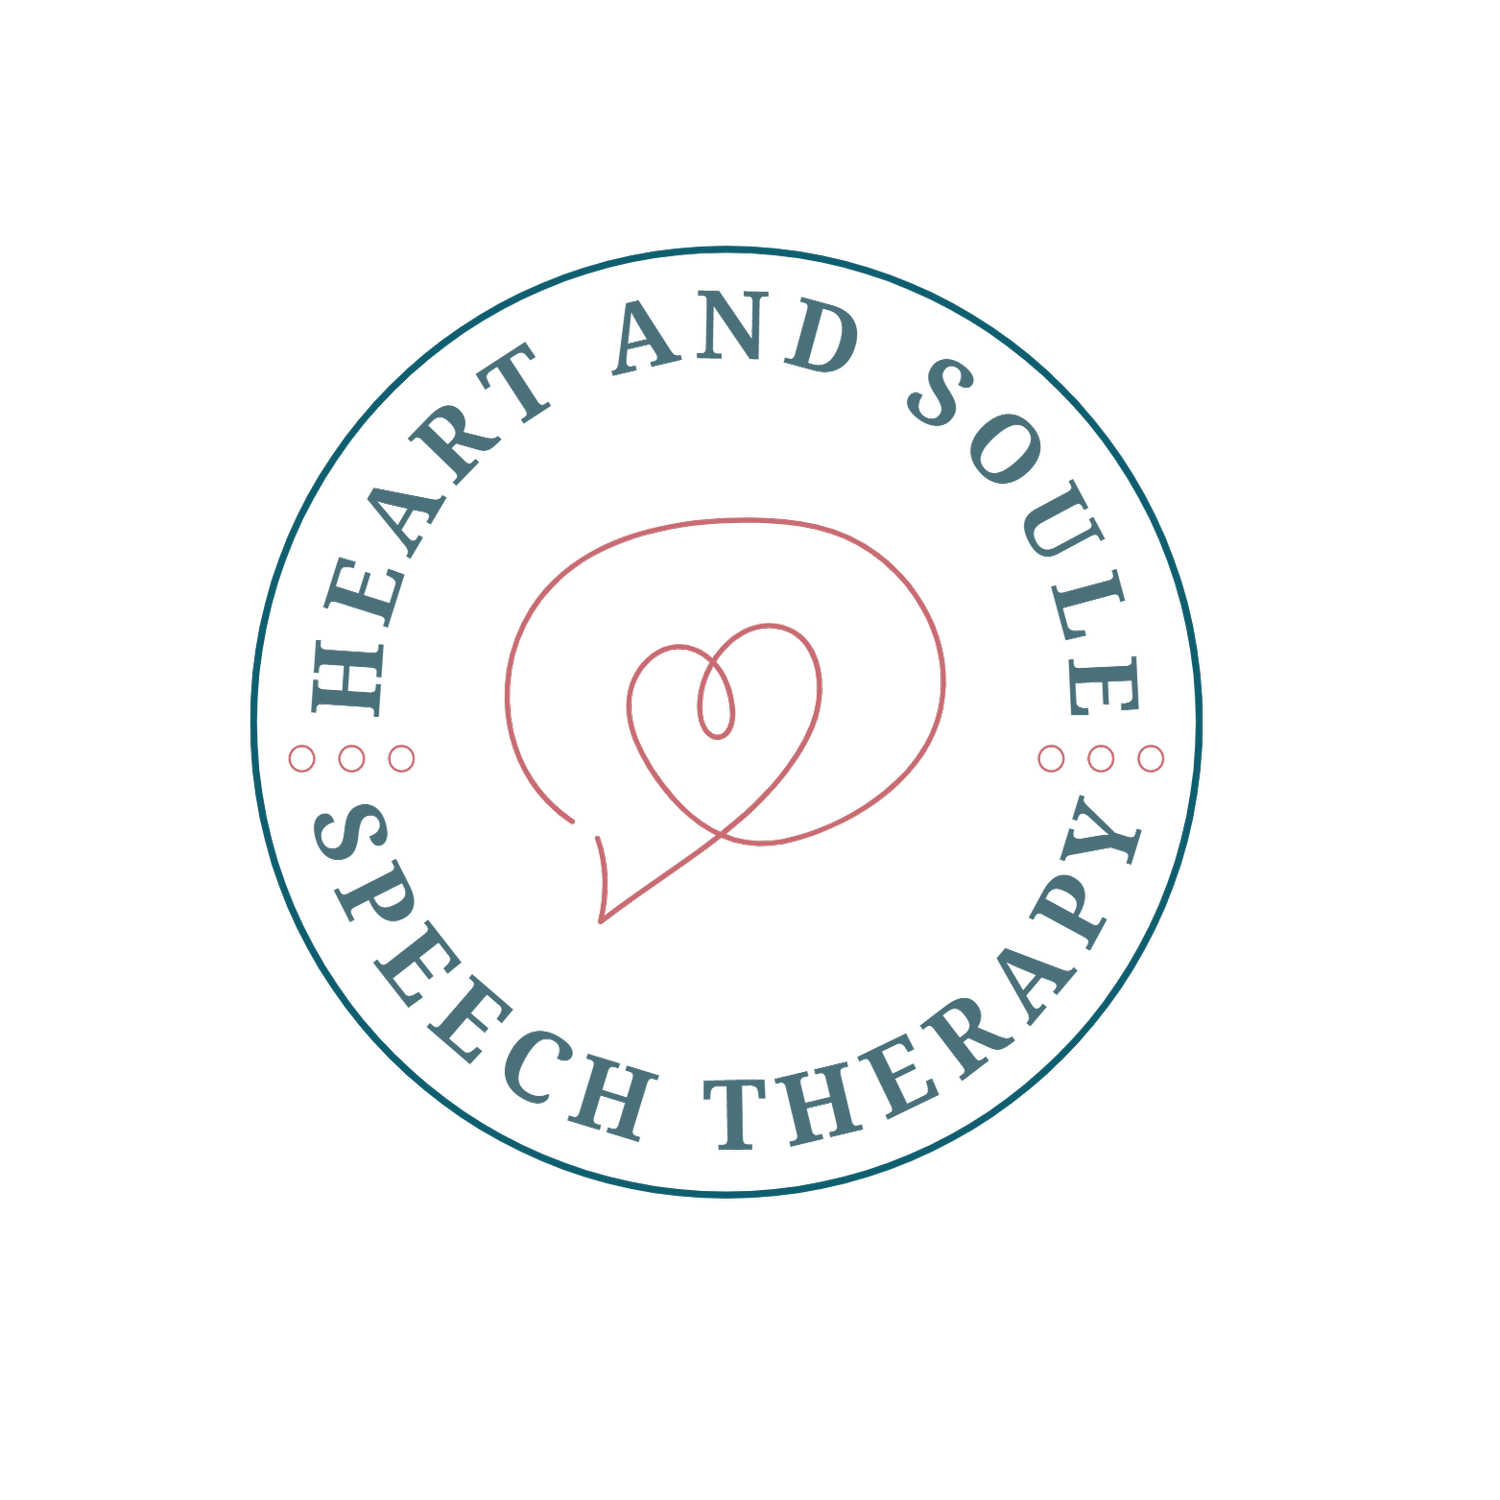 Heart and Soule Speech Therapy